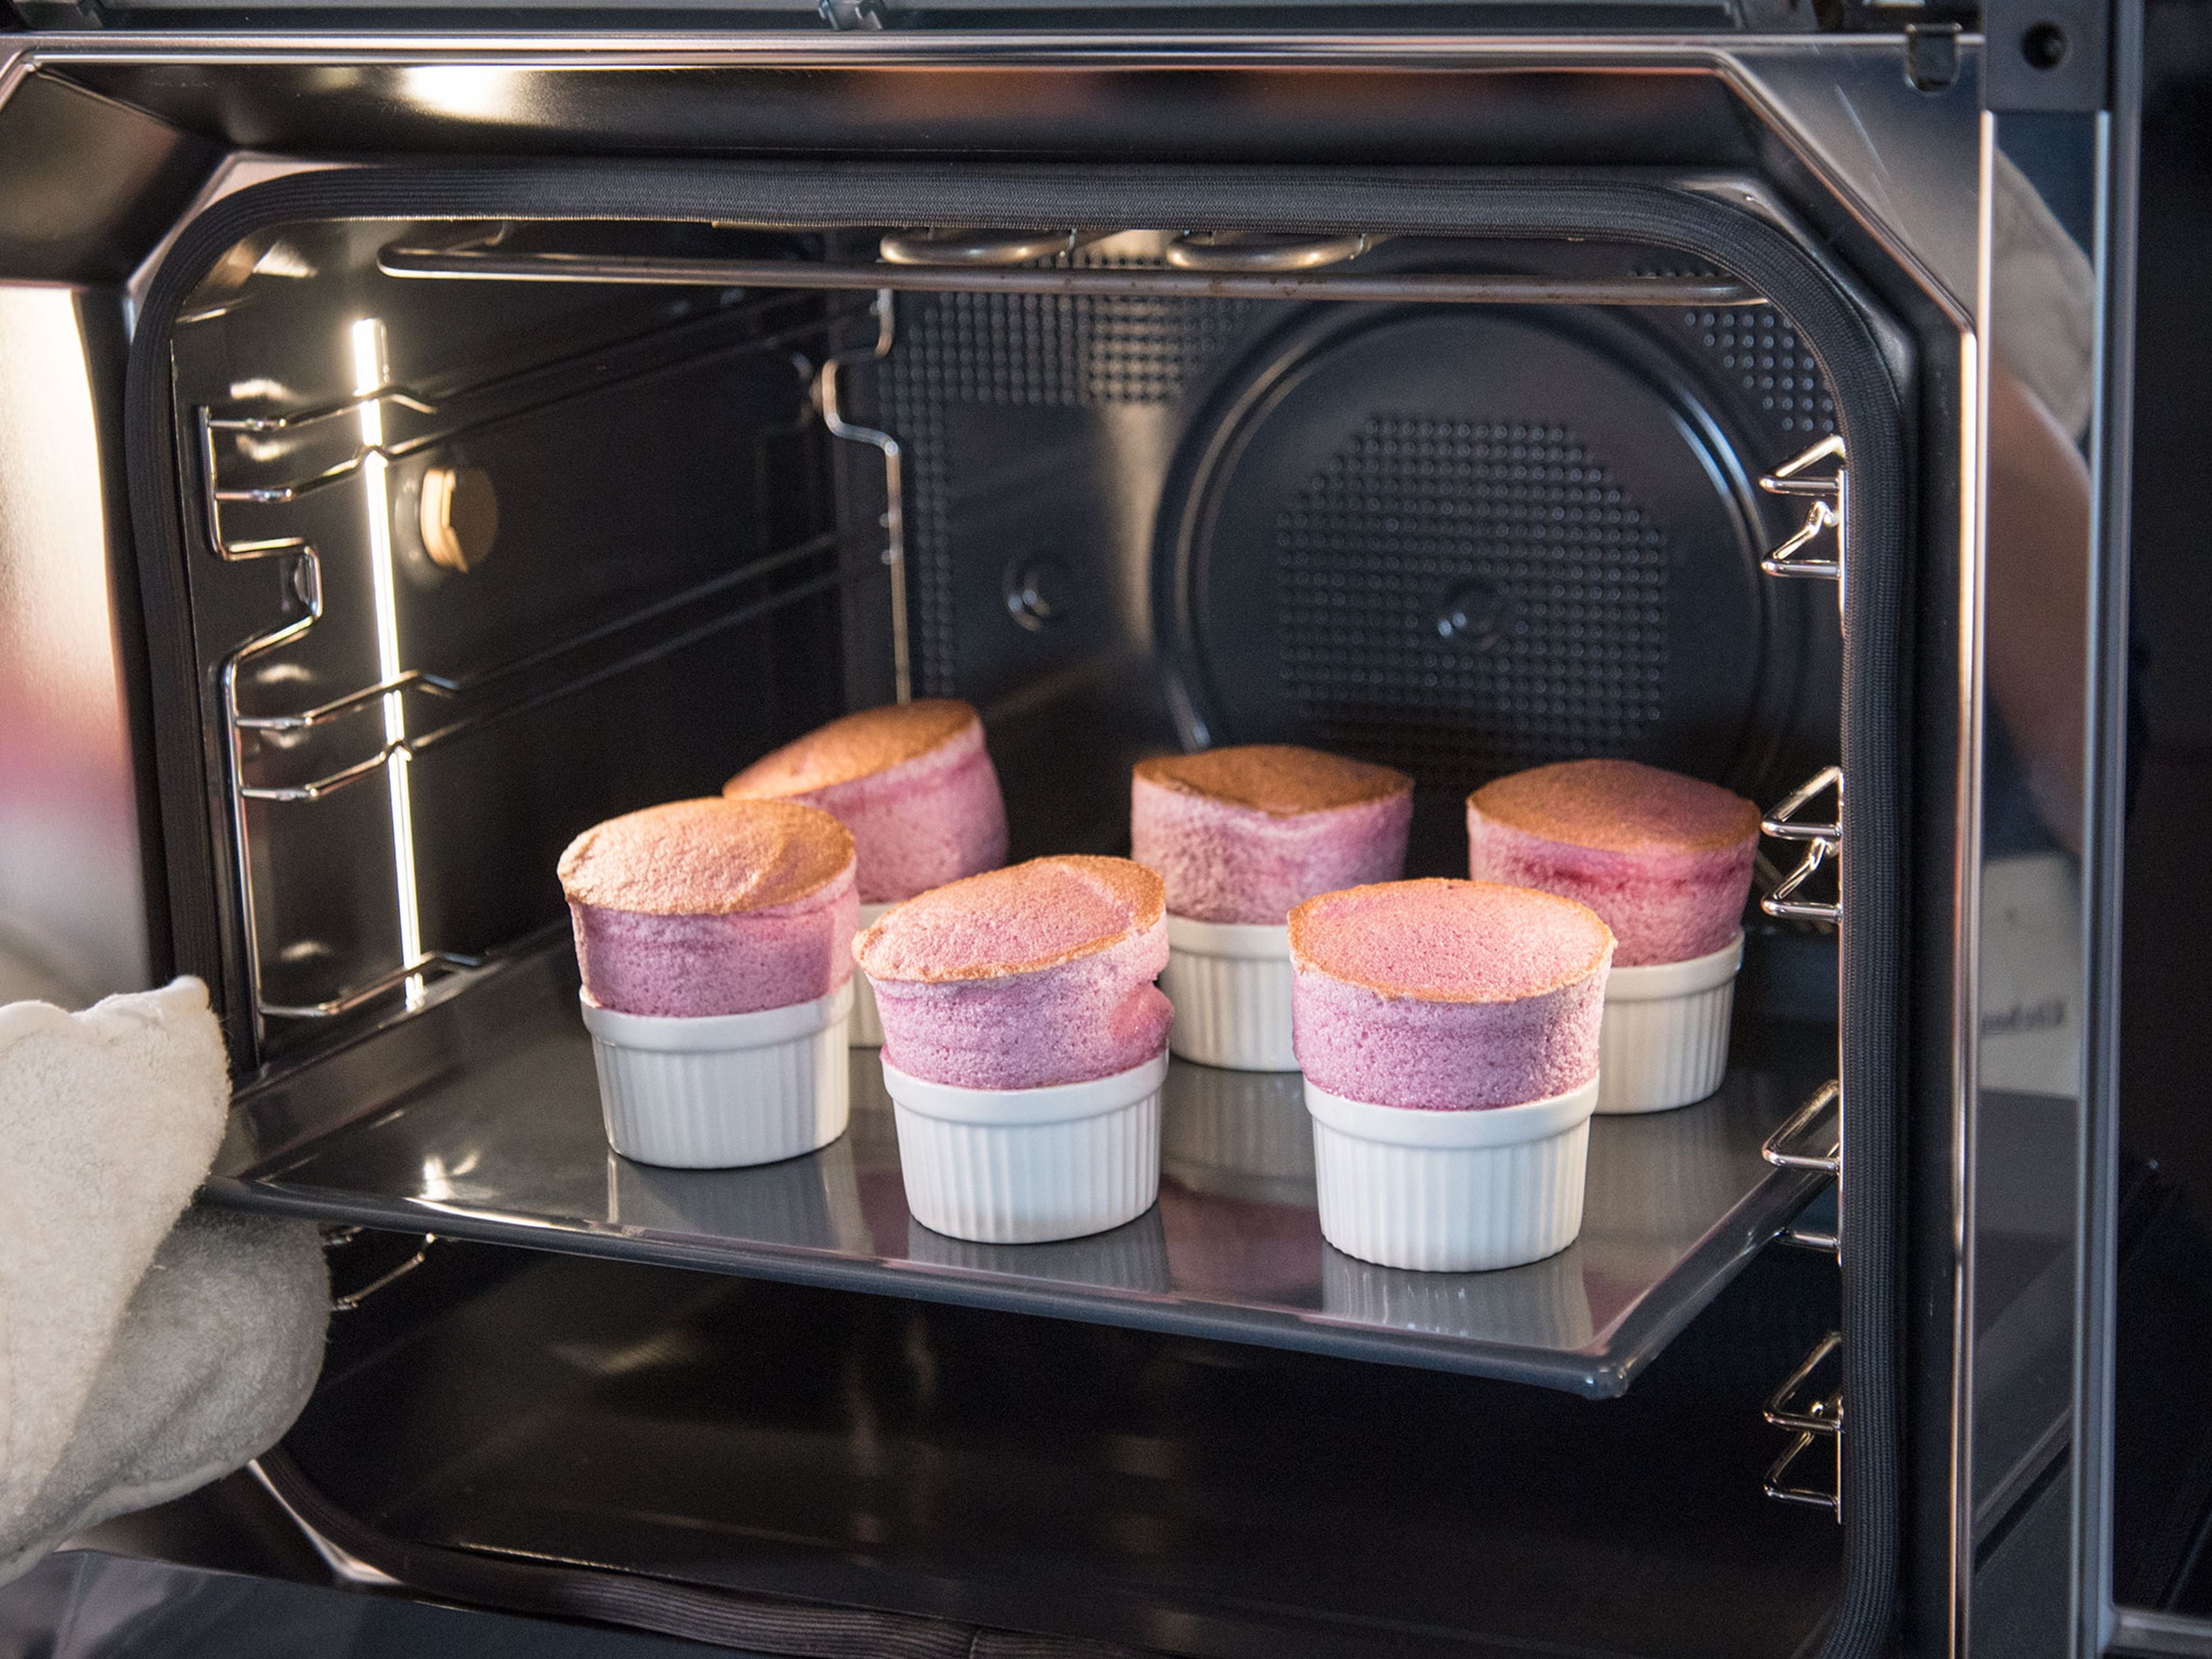 Divide the batter evenly between the soufflé forms and smooth out the tops. Place the filled forms on the baking sheet and transfer to preheated oven. Bake for approx. 14 min.